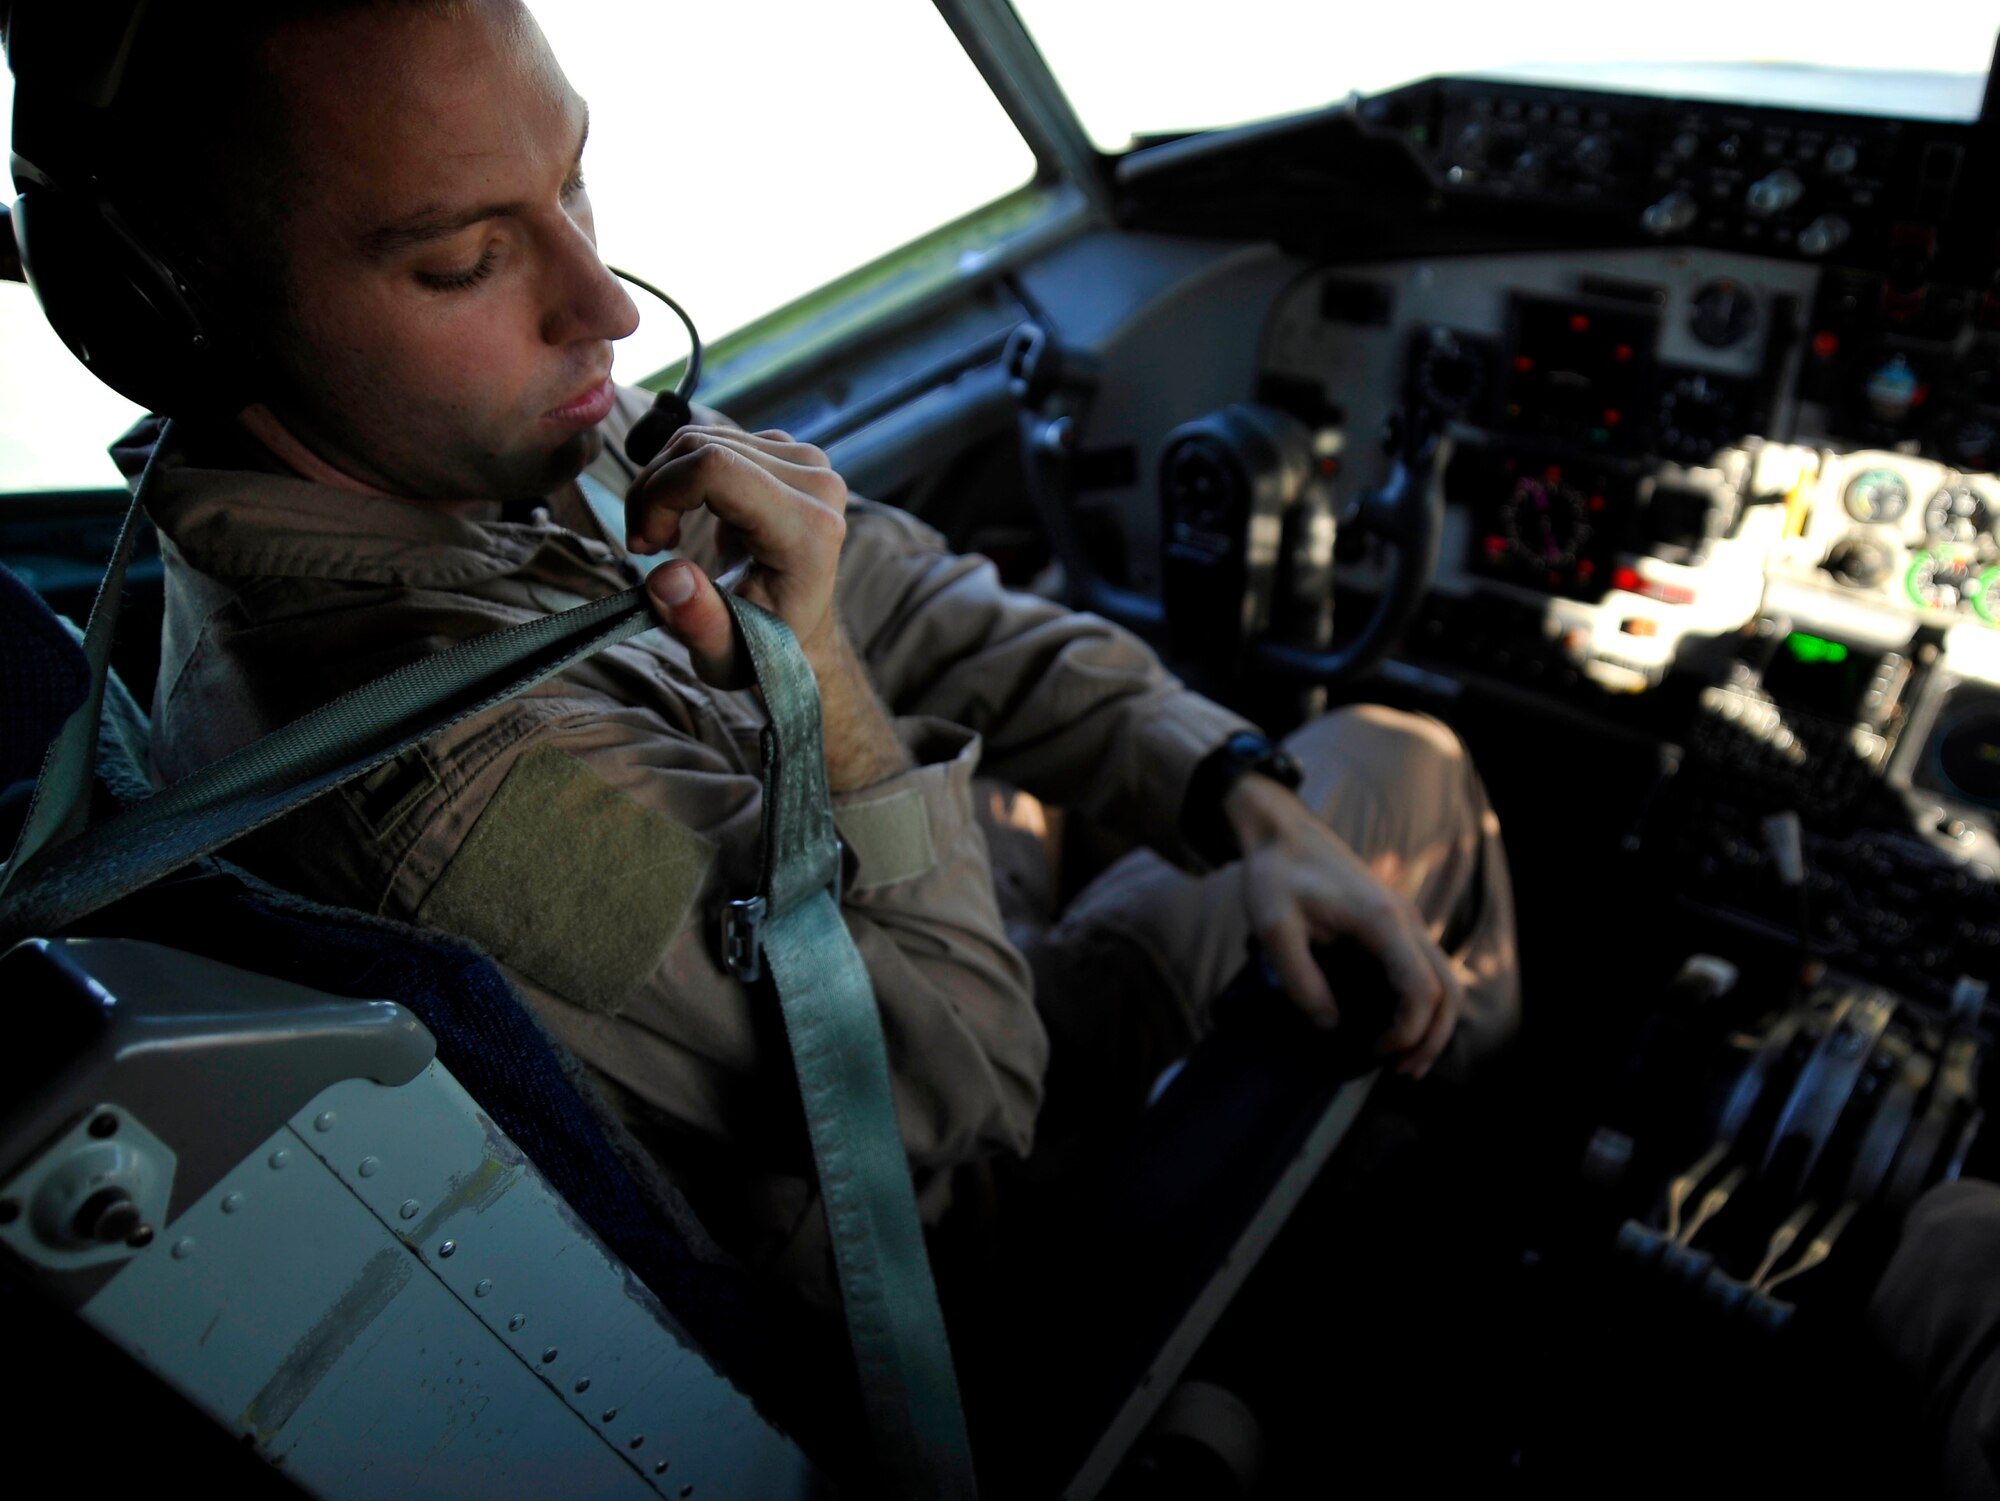 U.S. Air Force Capt. Brandon Gillet, 340th Expeditionary Air Refueling Squadron KC-135 Stratotanker pilot, puts on his seatbelt before starting engines, Jan.15, 2010, in Southwest Asia.  The KC-135 will be refueling aircraft over Afgahanistan to support Operation Enduring Freedom. (U.S. Air Force photo/ SSgt Angelita Lawrence/released)
